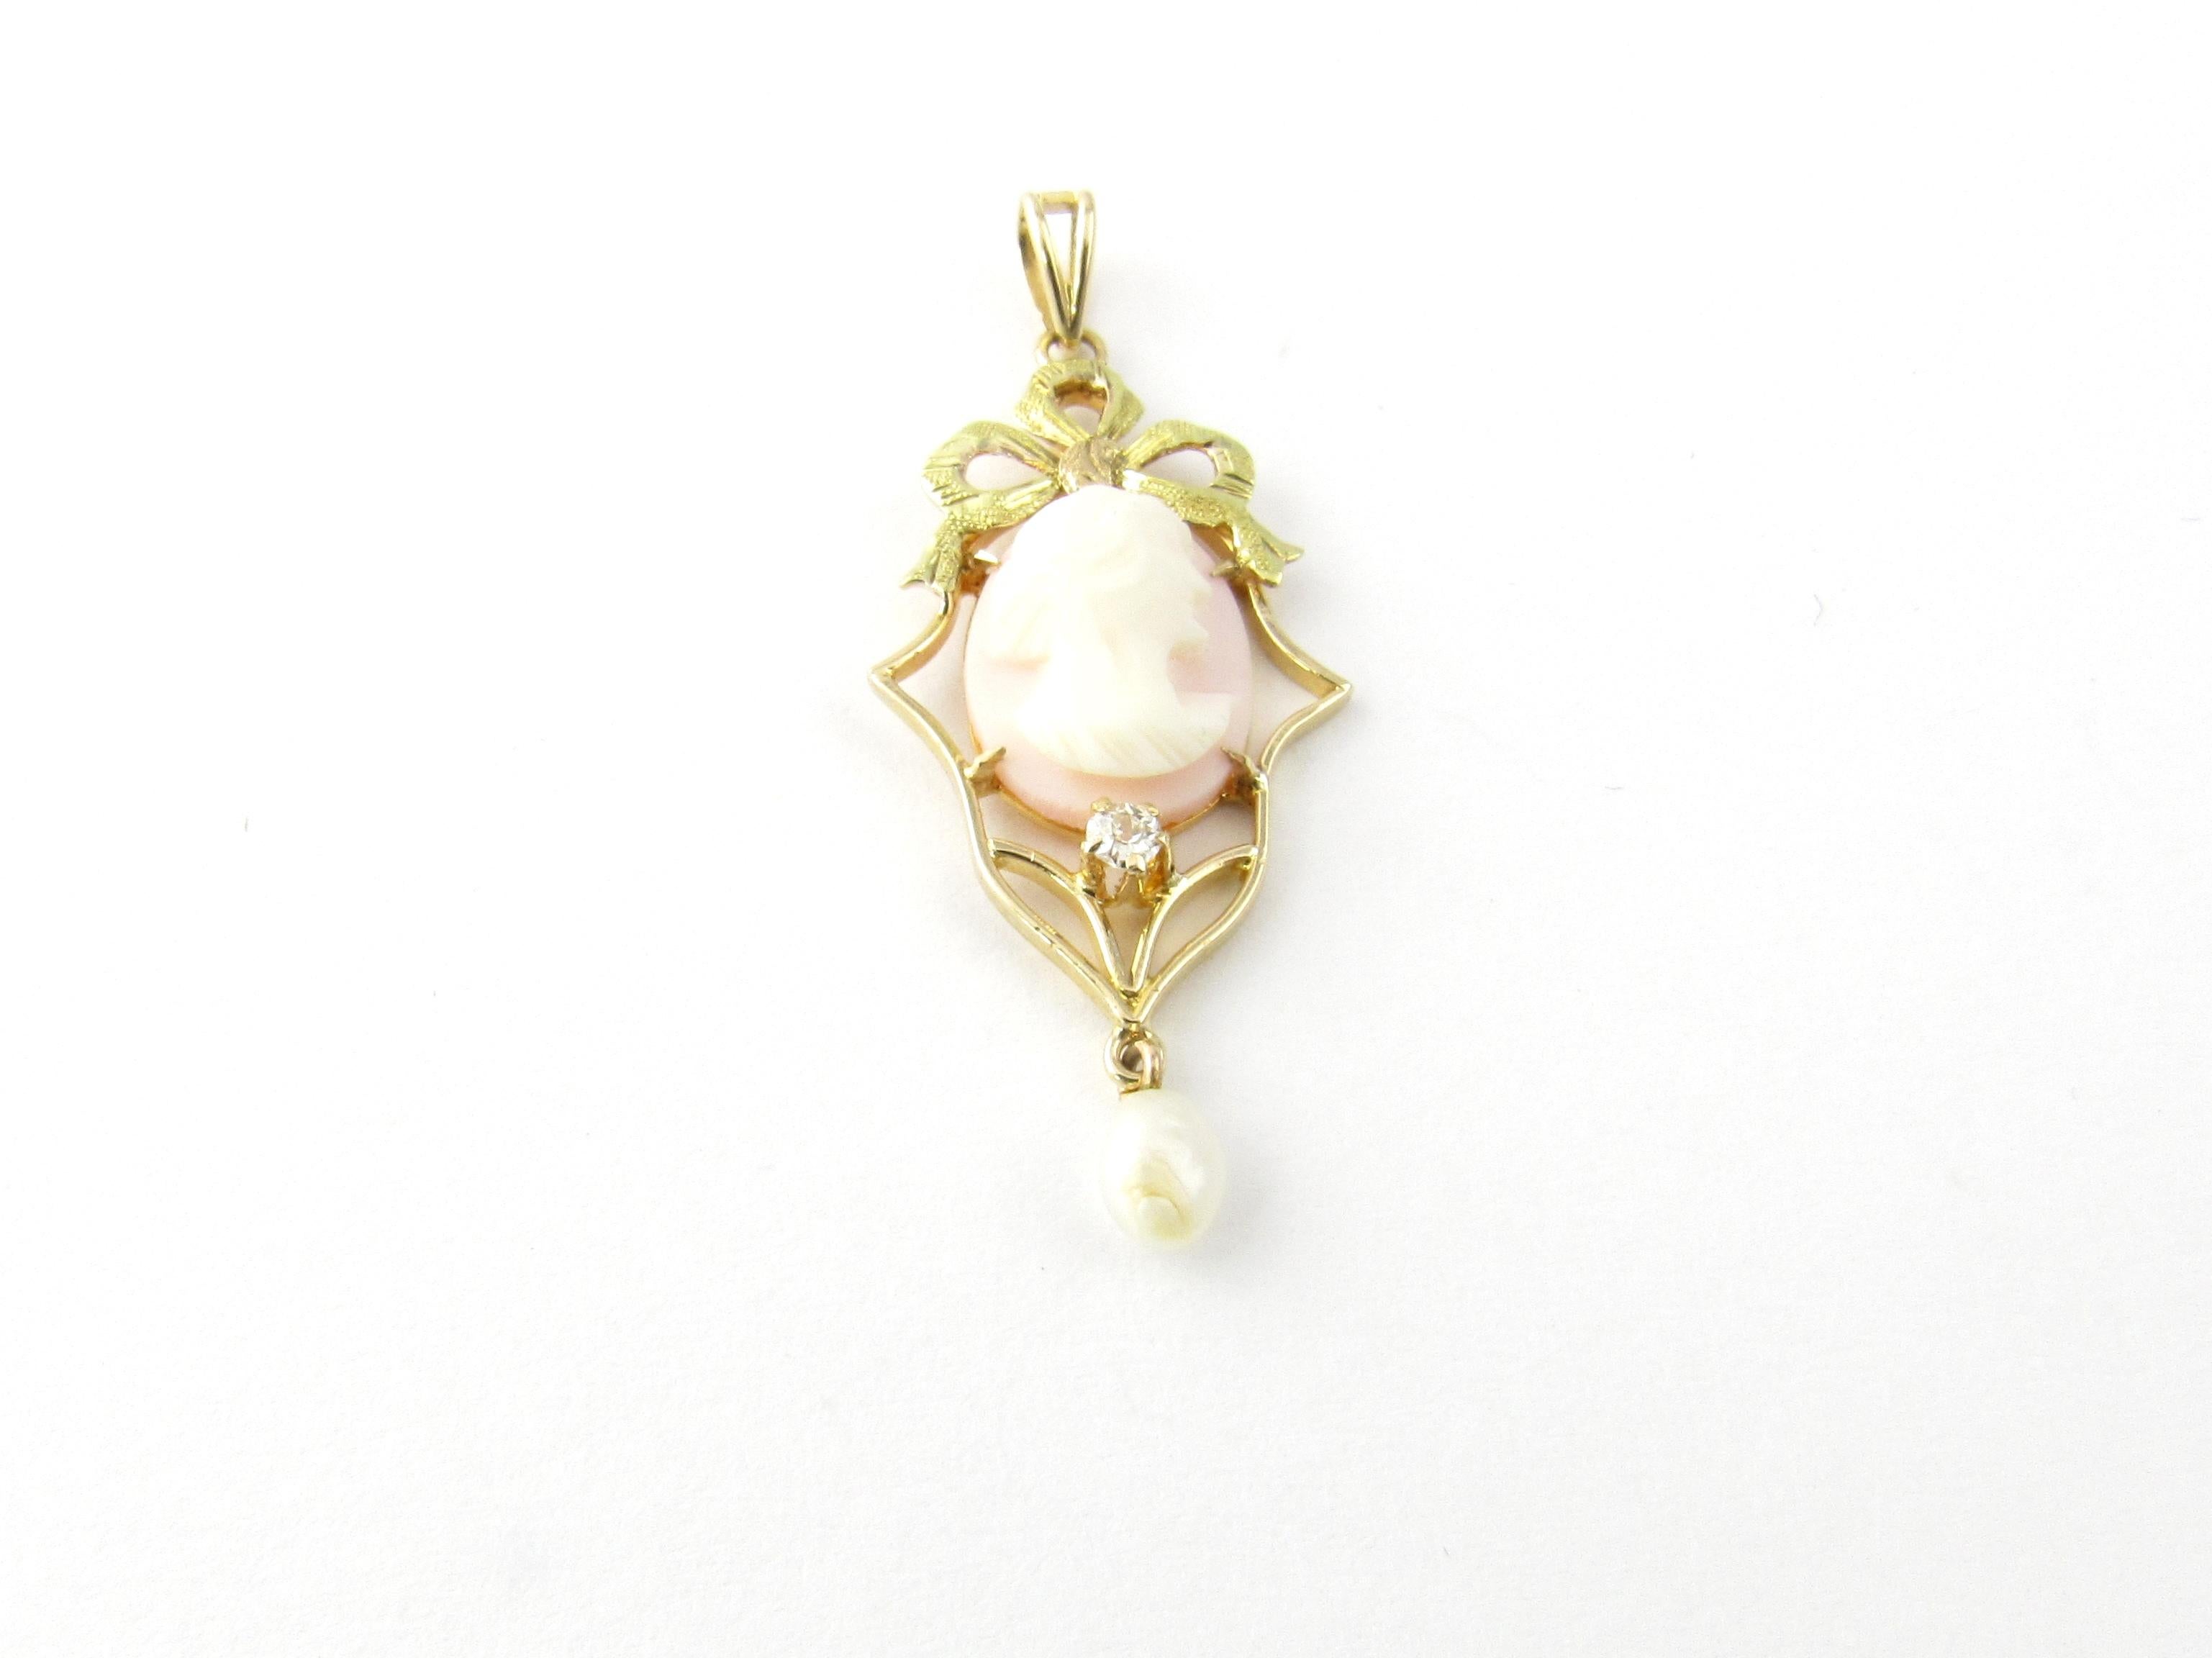 Vintage 14 Karat Yellow Gold and Diamond Cameo Pendant

This lovely cameo pendant is decorated with one round old mine cut diamond and one dangling freshwater pearl.

Approximate total diamond weight: .04 ct.

Diamond color: G

Diamond clarity: